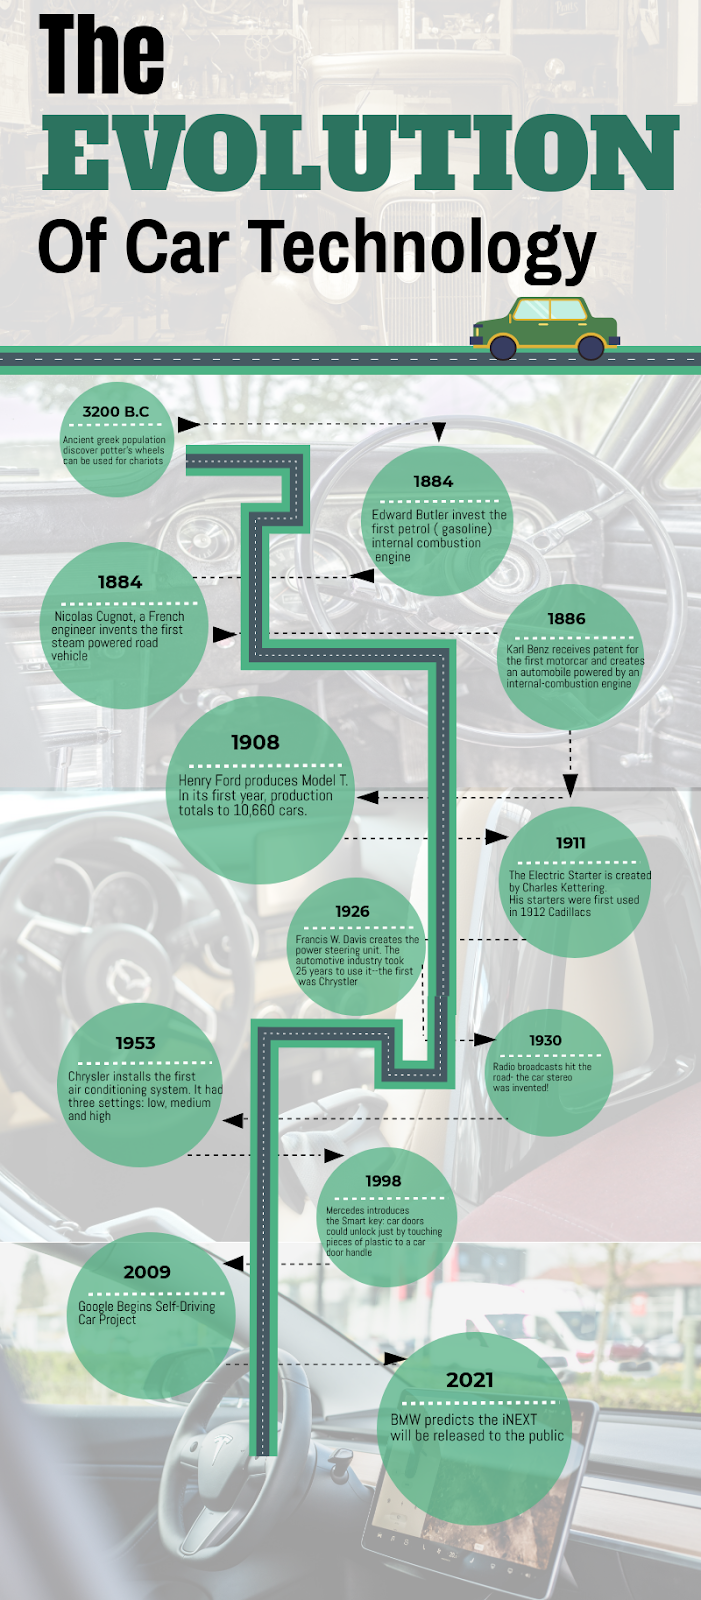 The Evolution of Car Technology